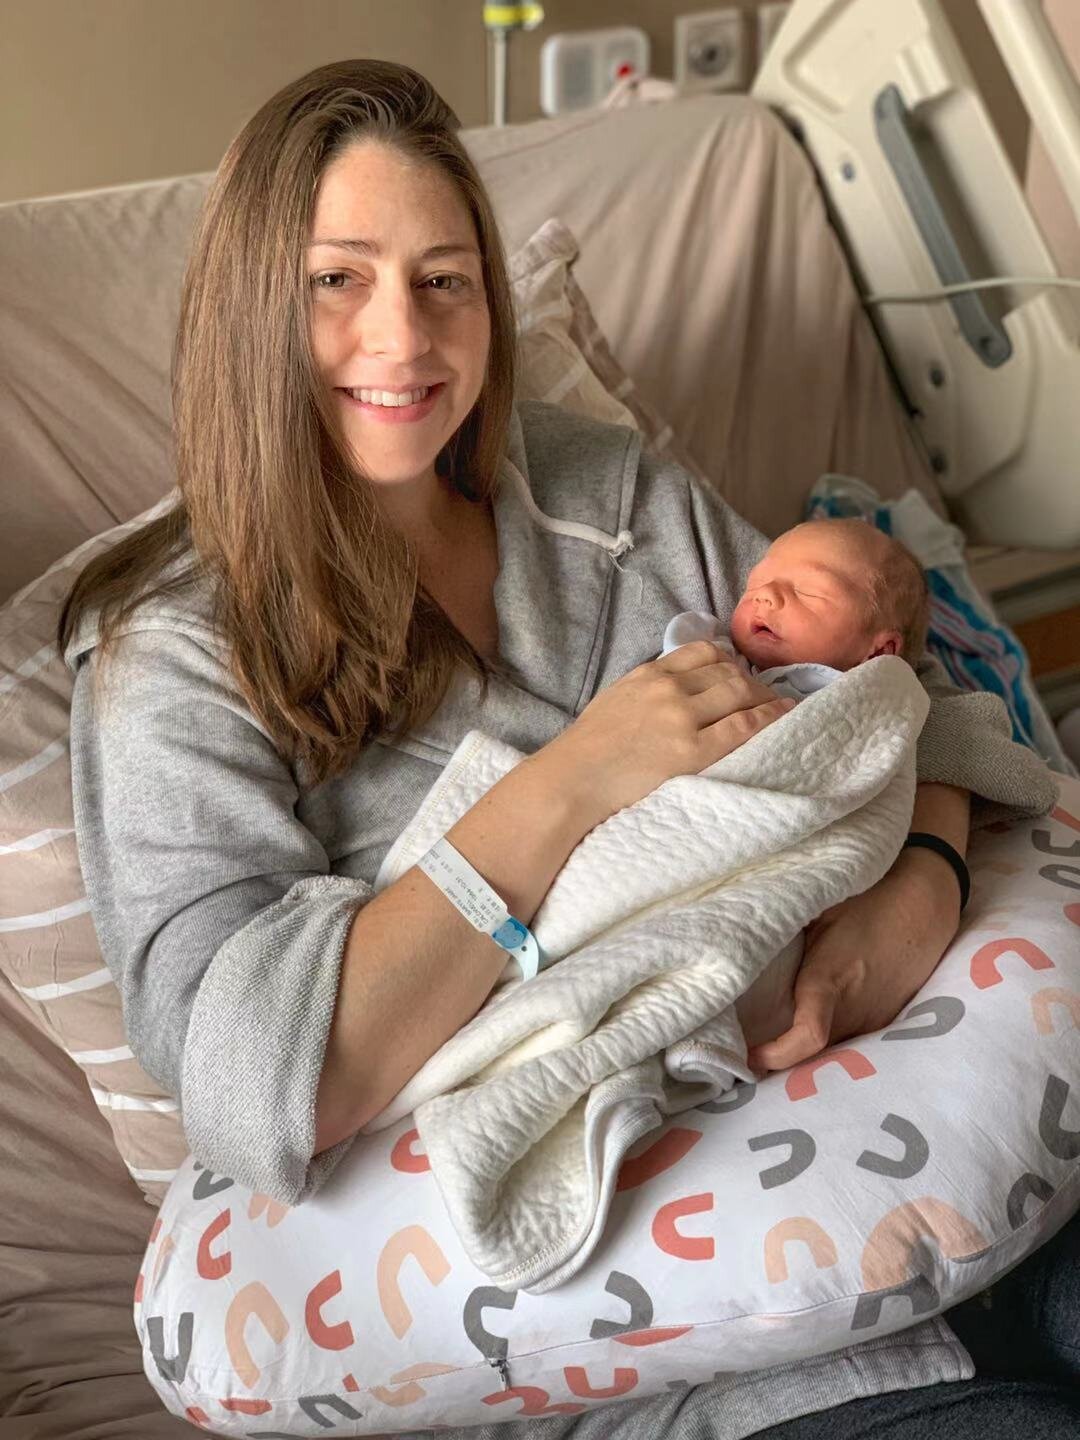 Jamie Barys: Congratulations on giving birth to your son Hamish since our podcast episode was recorded!